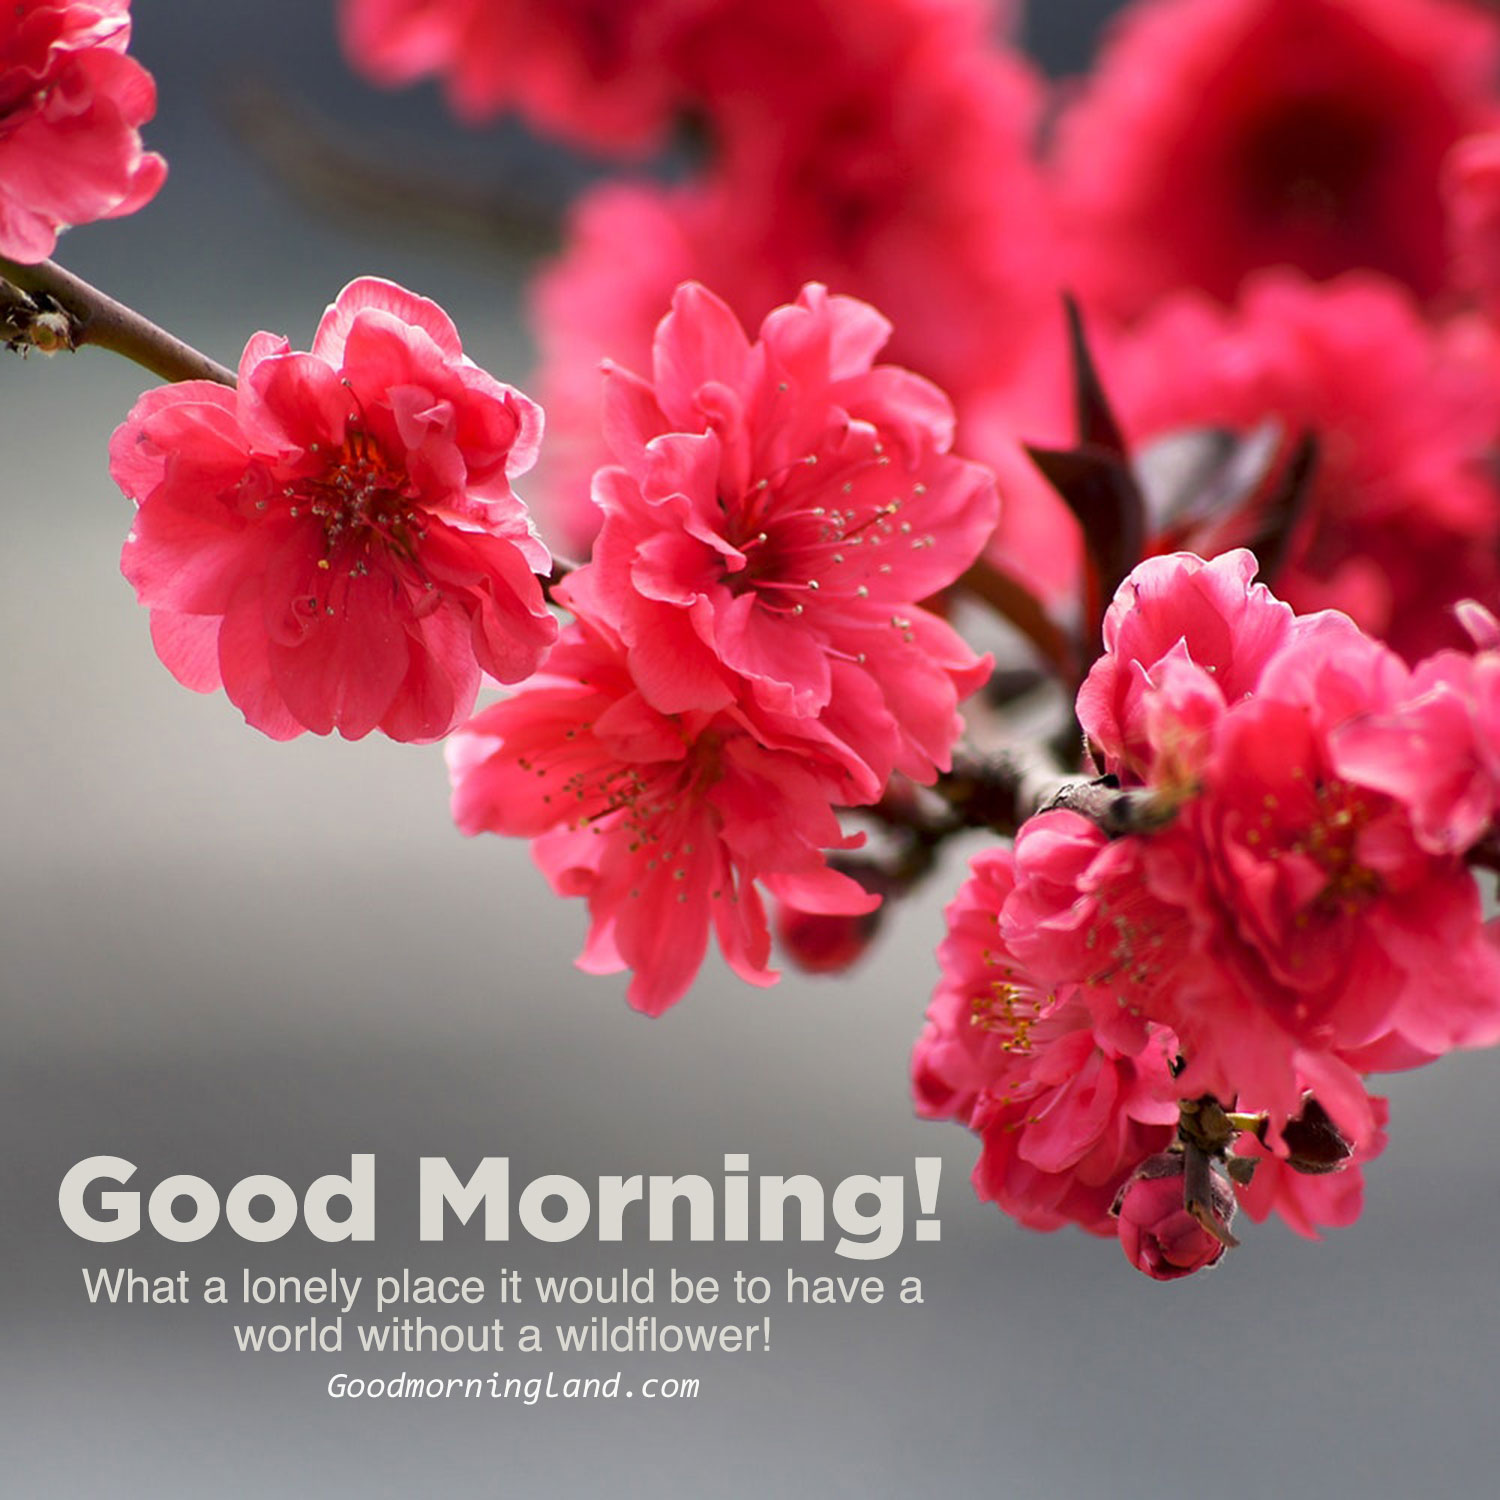 good morning flowers quotes